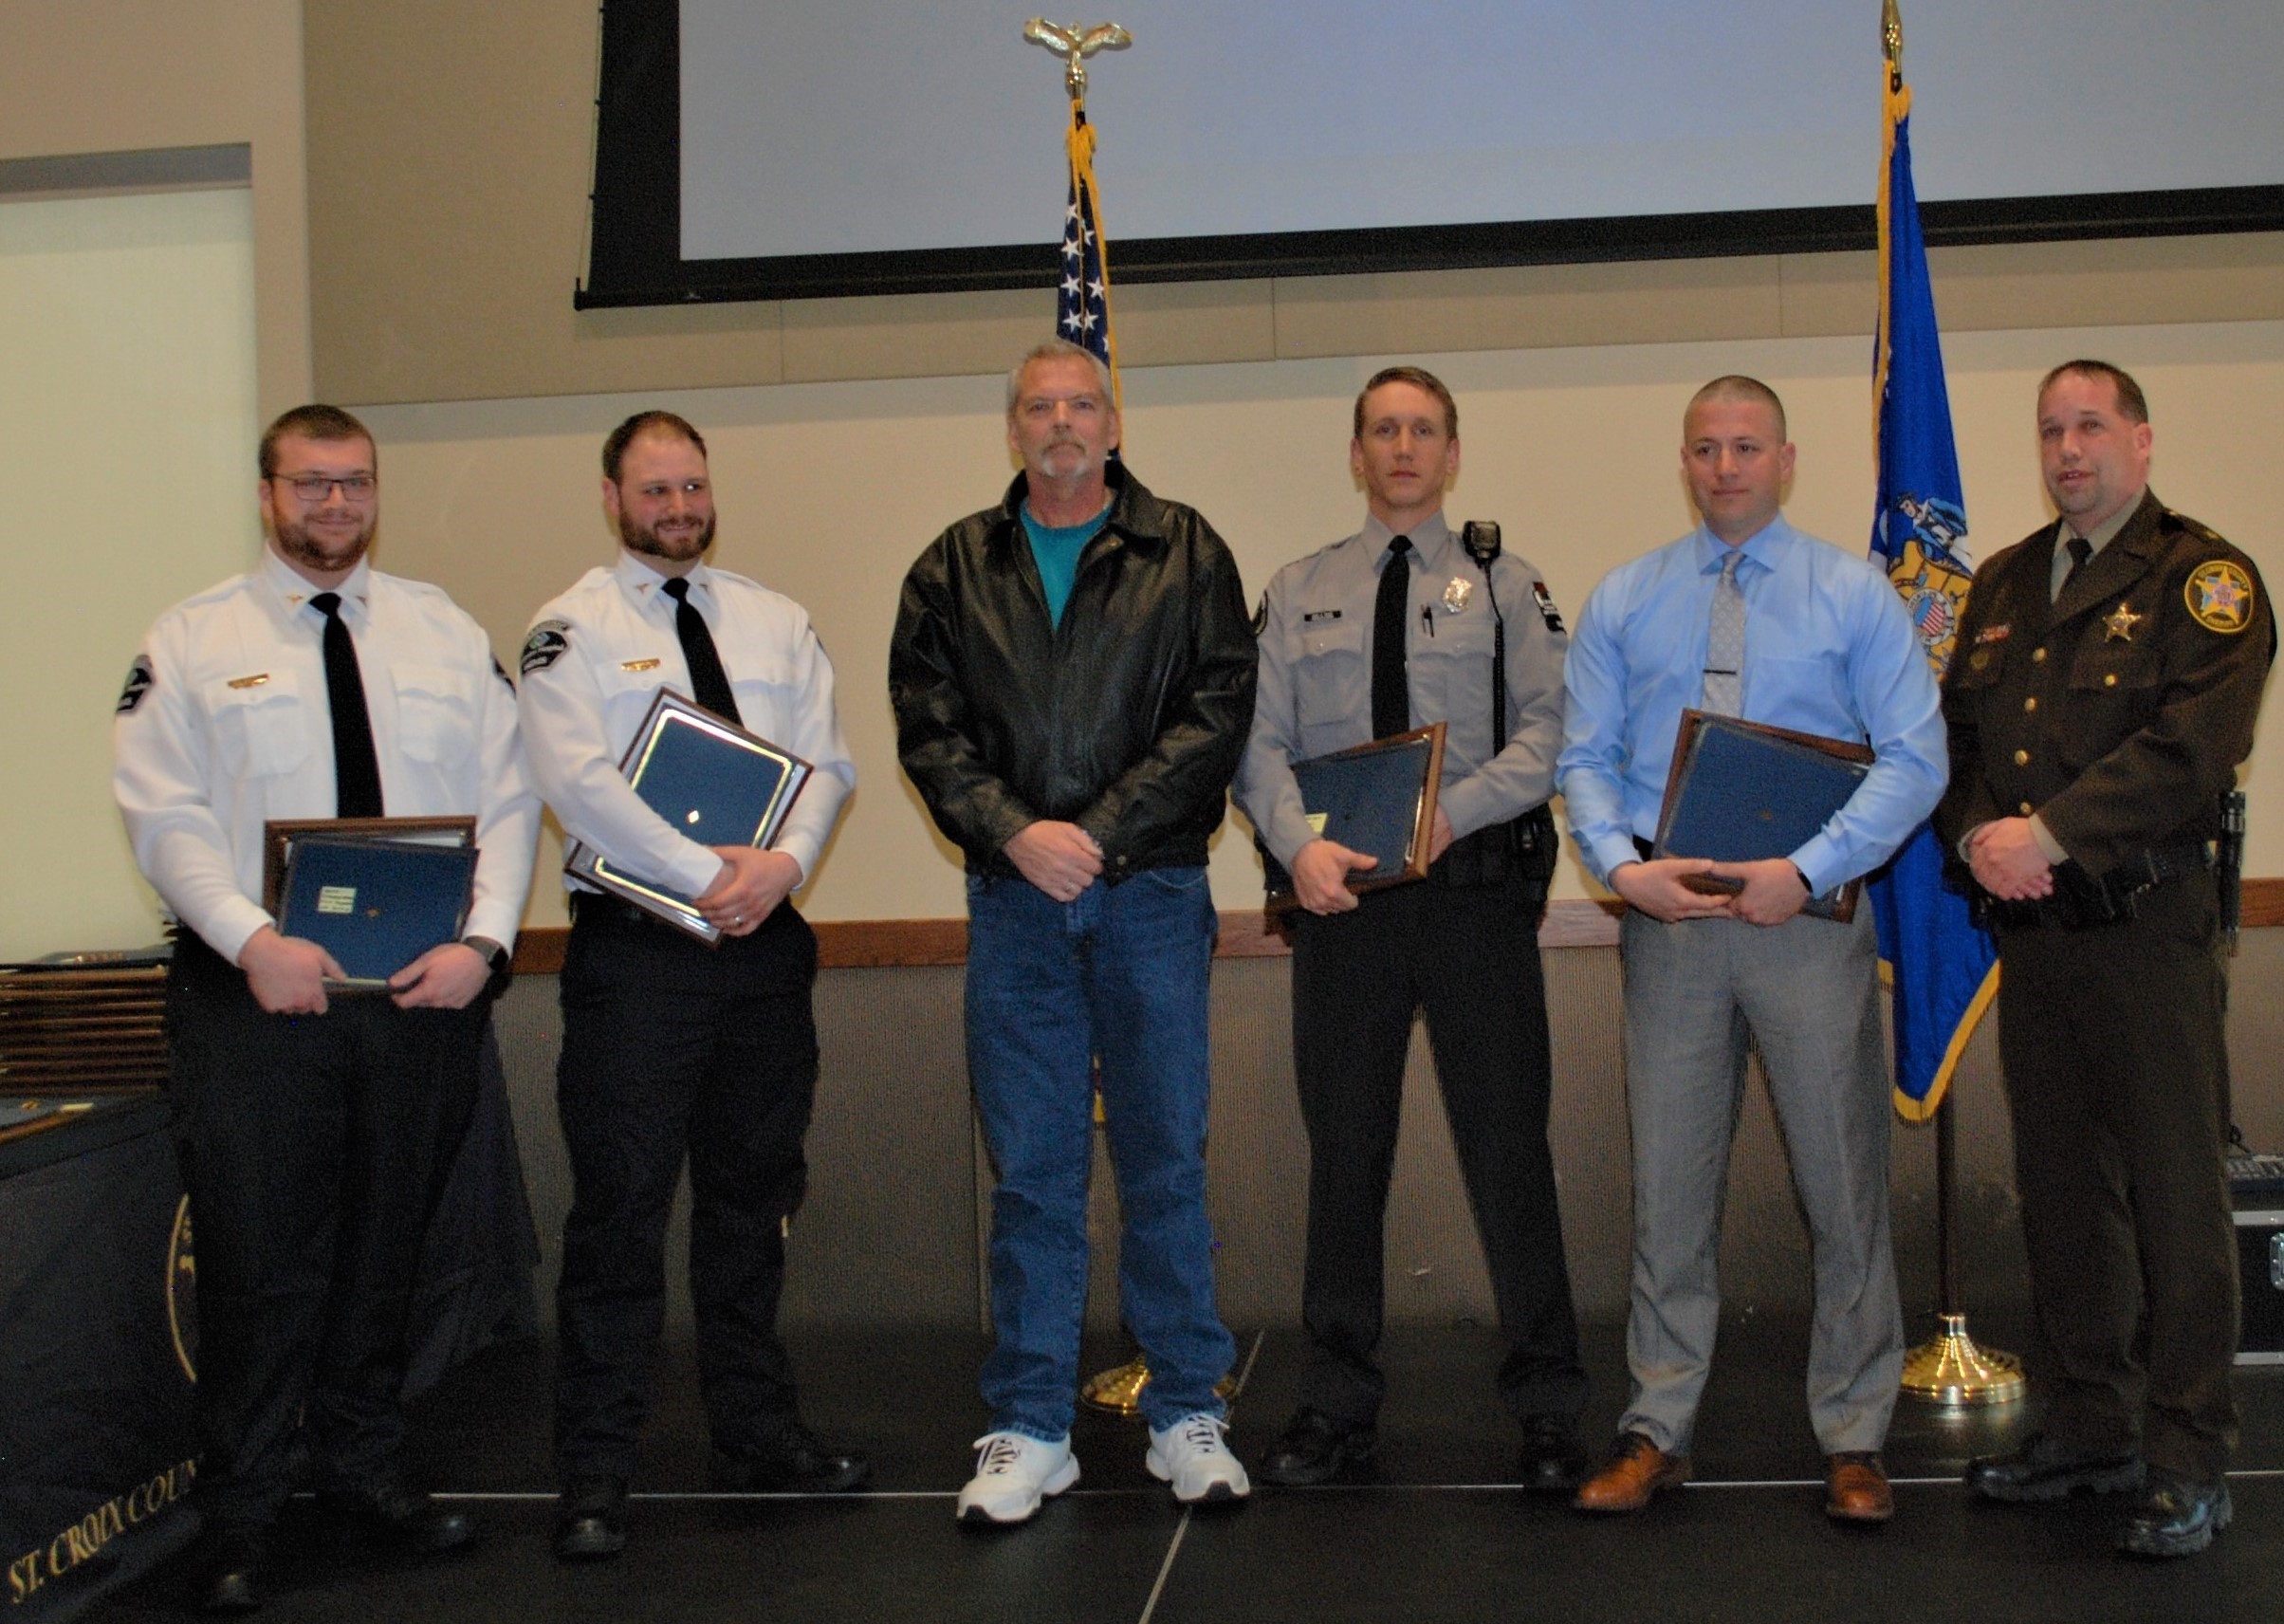 From left to right, Lakeview Paramedics Kevin Zimmerman and Jeff Price, Keith Butterfield, Warden Isaac Kruse, St. Croix County Deputy Nick Krueger and St. Croix County Sheriff Scott Knudson.